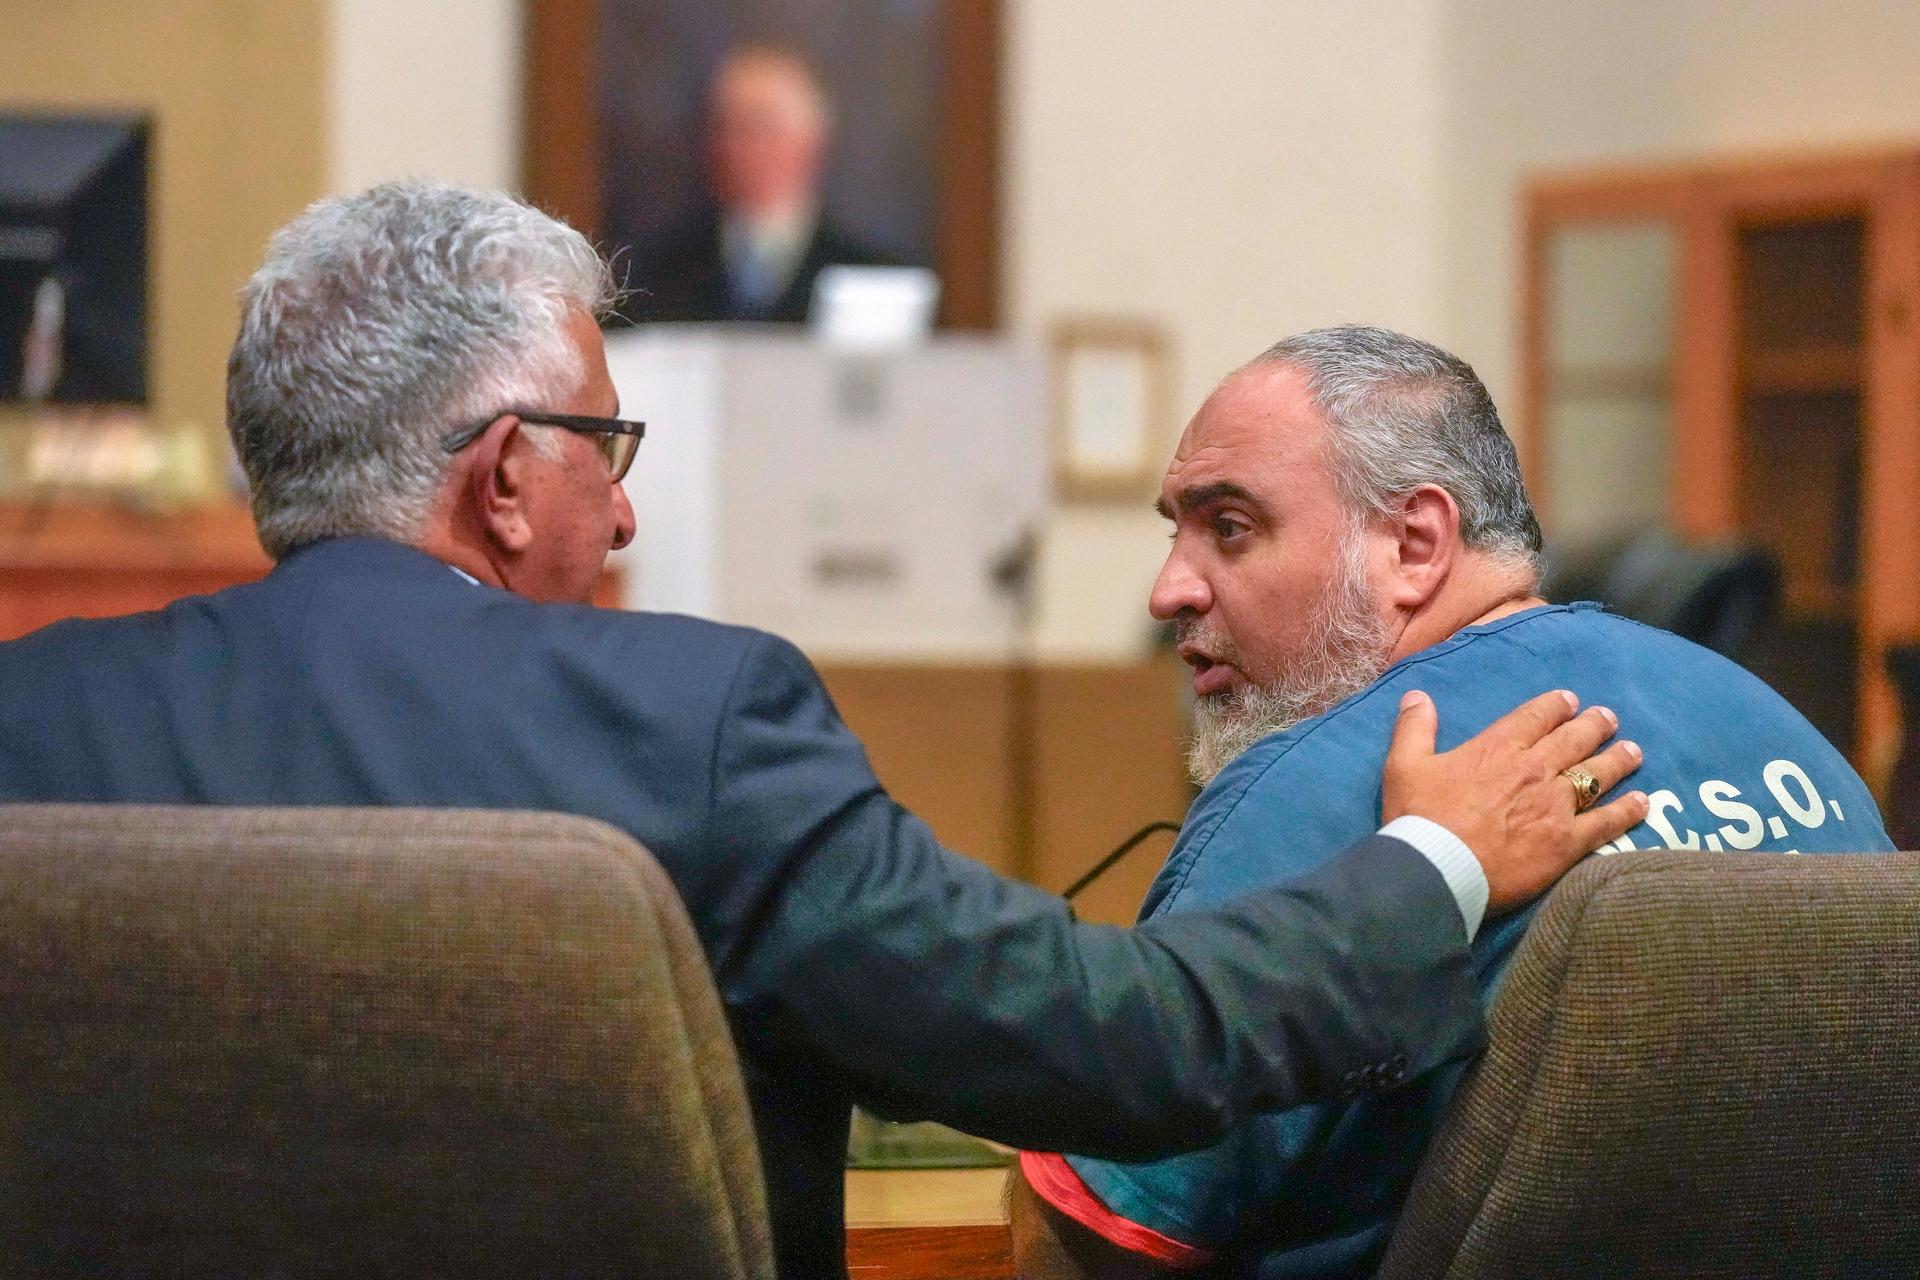 Attorney Ron Bamieh (L) talks to his client Loay Abdelfattah Alnaji, a professor of computer science at Moorpark College, during an appearance in Ventura County Superior Court in connection with the death of Paul Kessler in Ventura, Calif., on Nov. 17, 2023. (Damian Dovarganes/AP Photo)